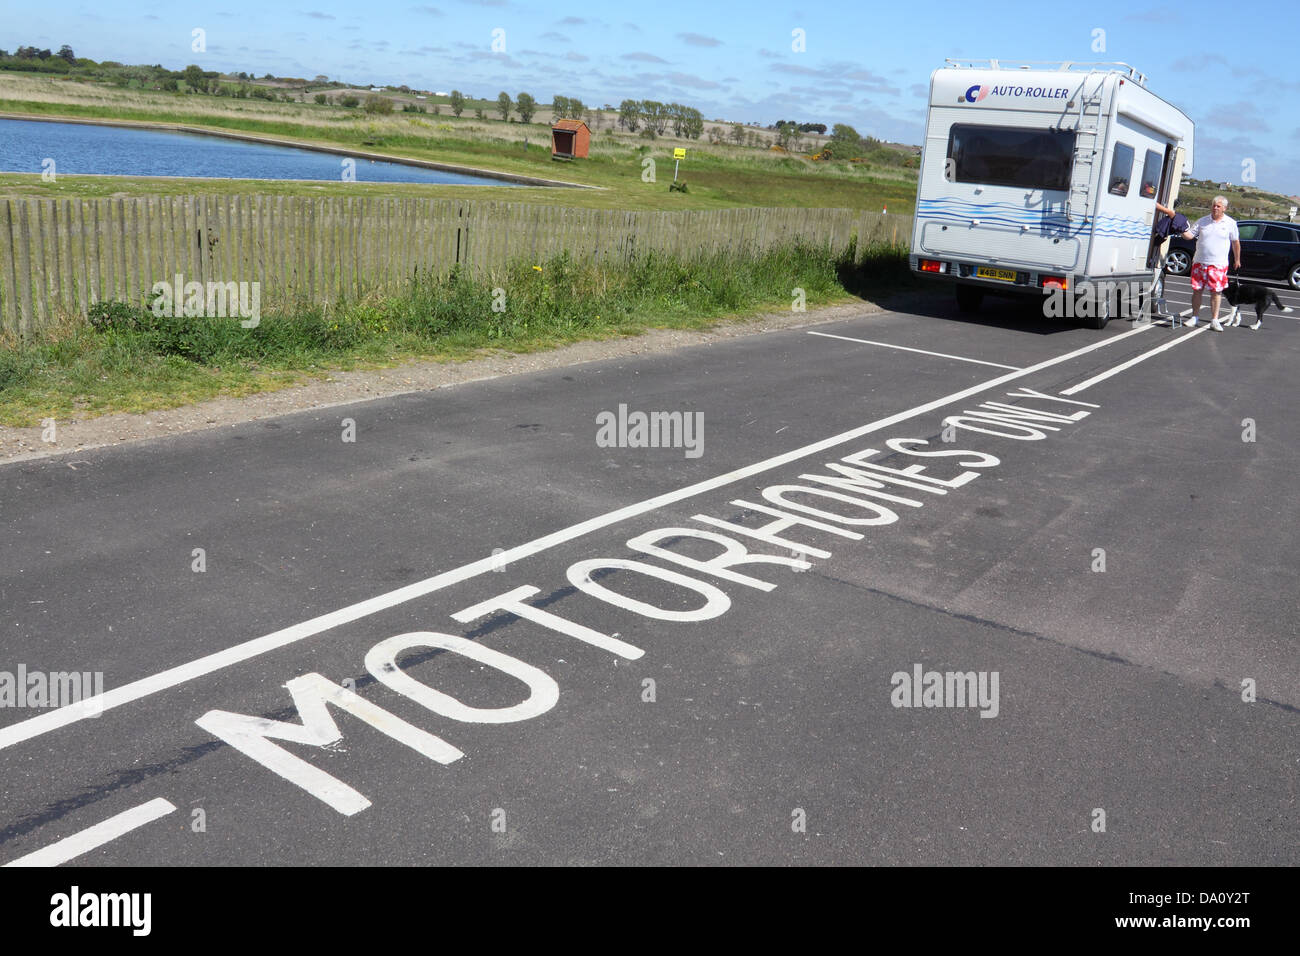 Motorhome parking spaces in car park, Southwold, Suffolk, England. Stock Photo